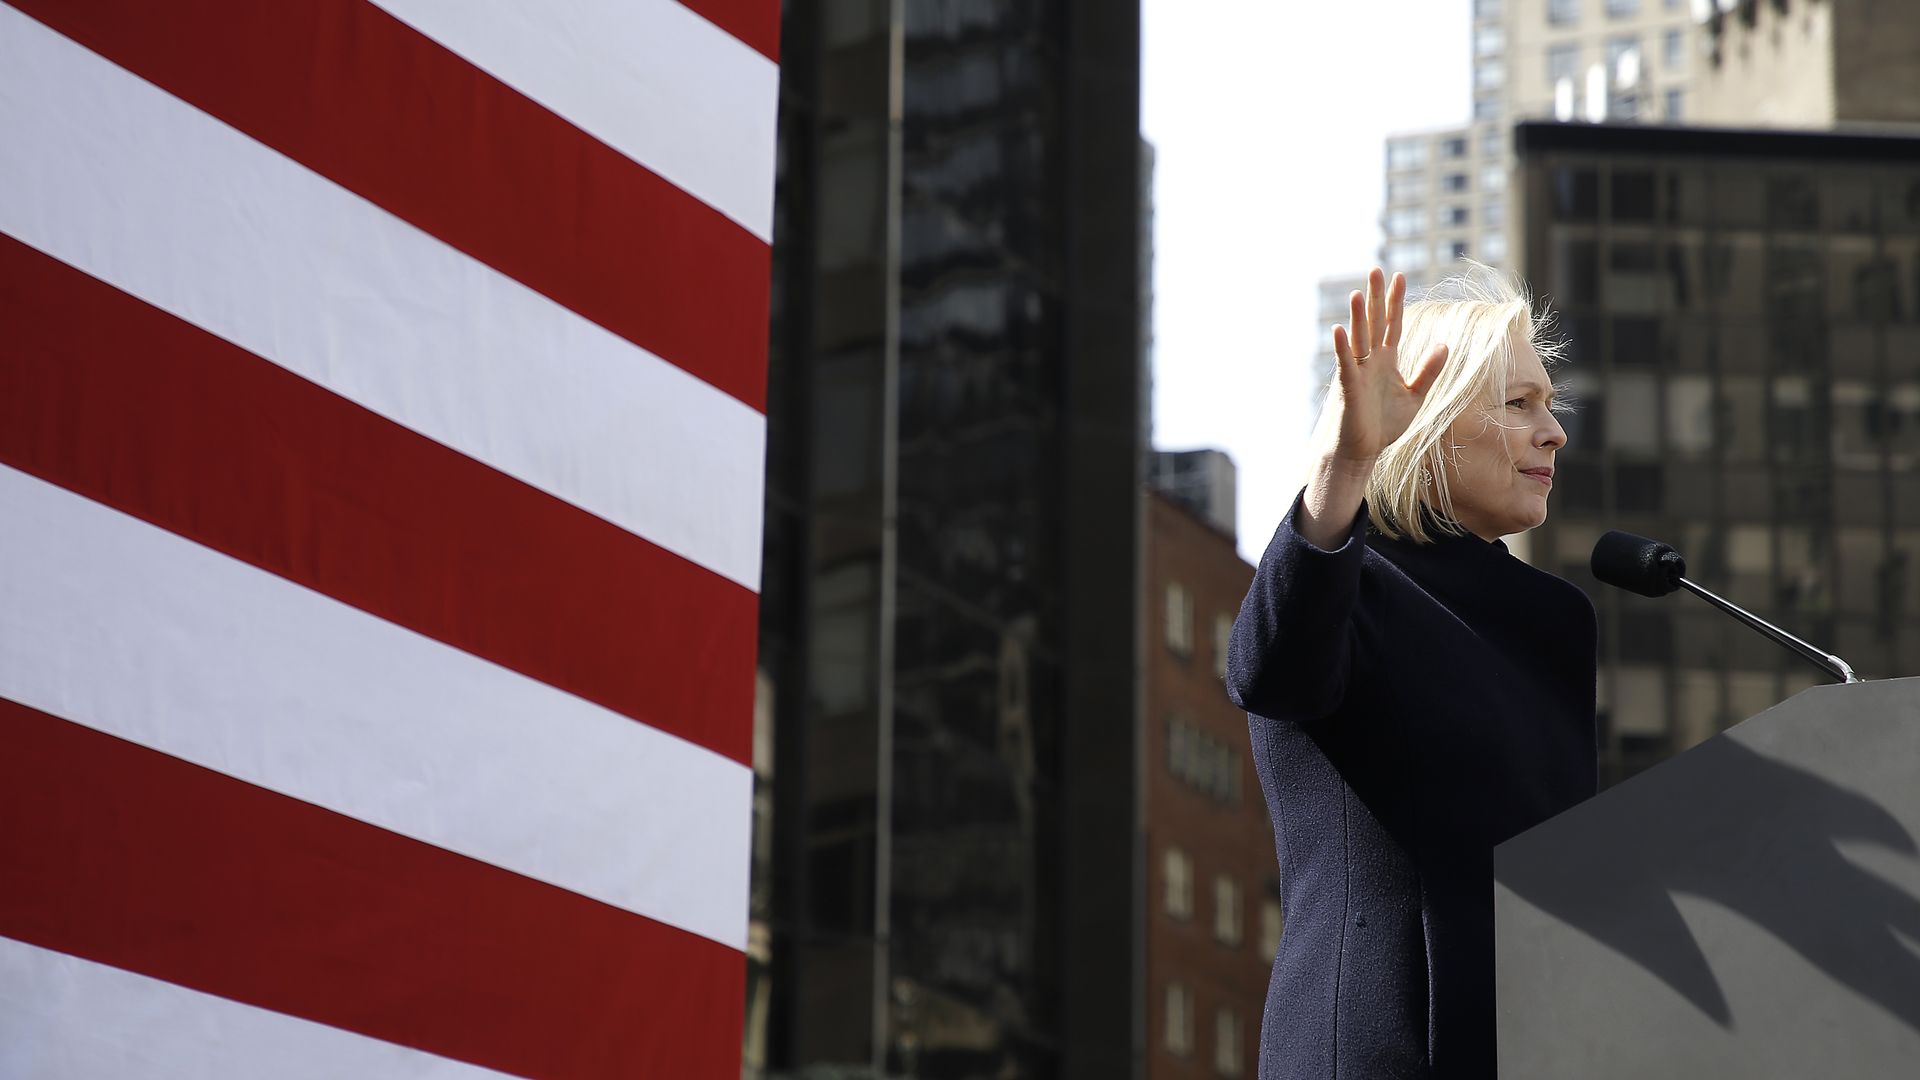 Sen. Gillibrand stands and waves in front of a podium with a microphone, with an American flag behind her.